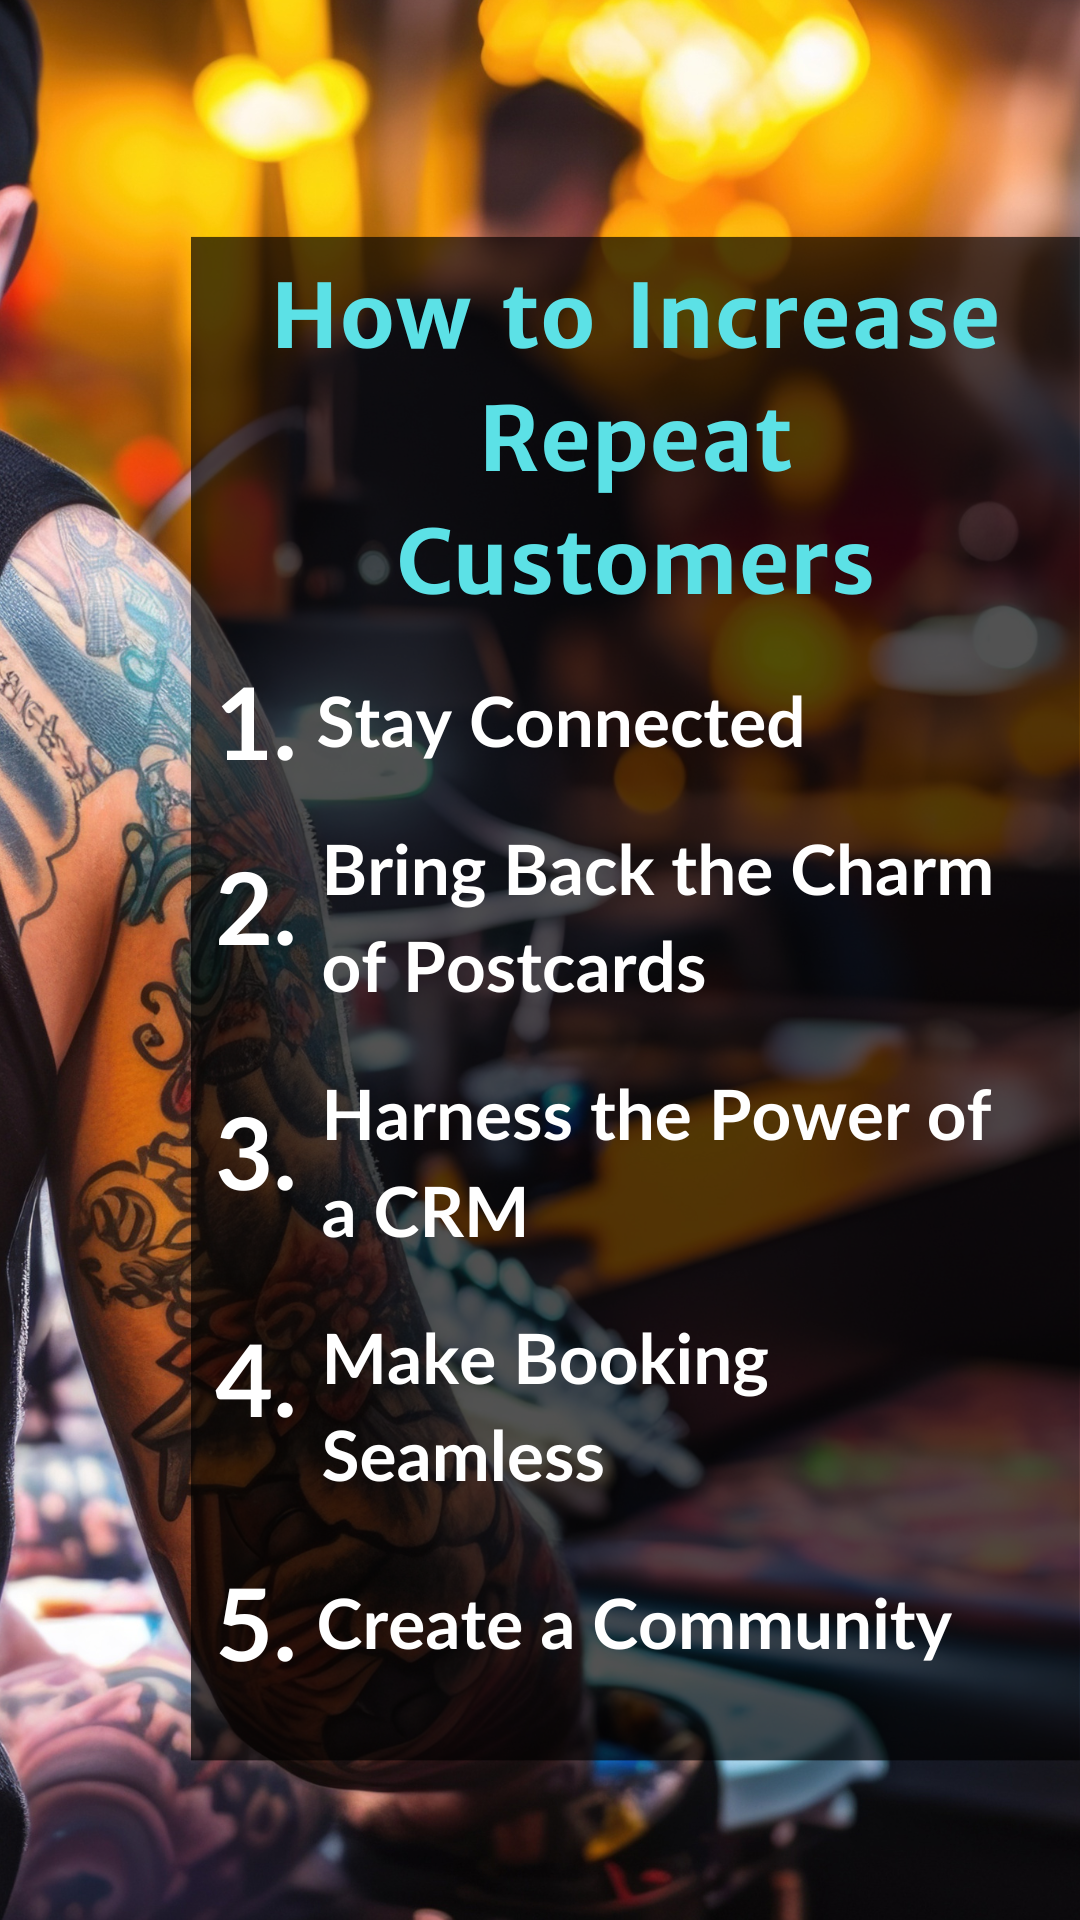 How to Increase Repeat Customers